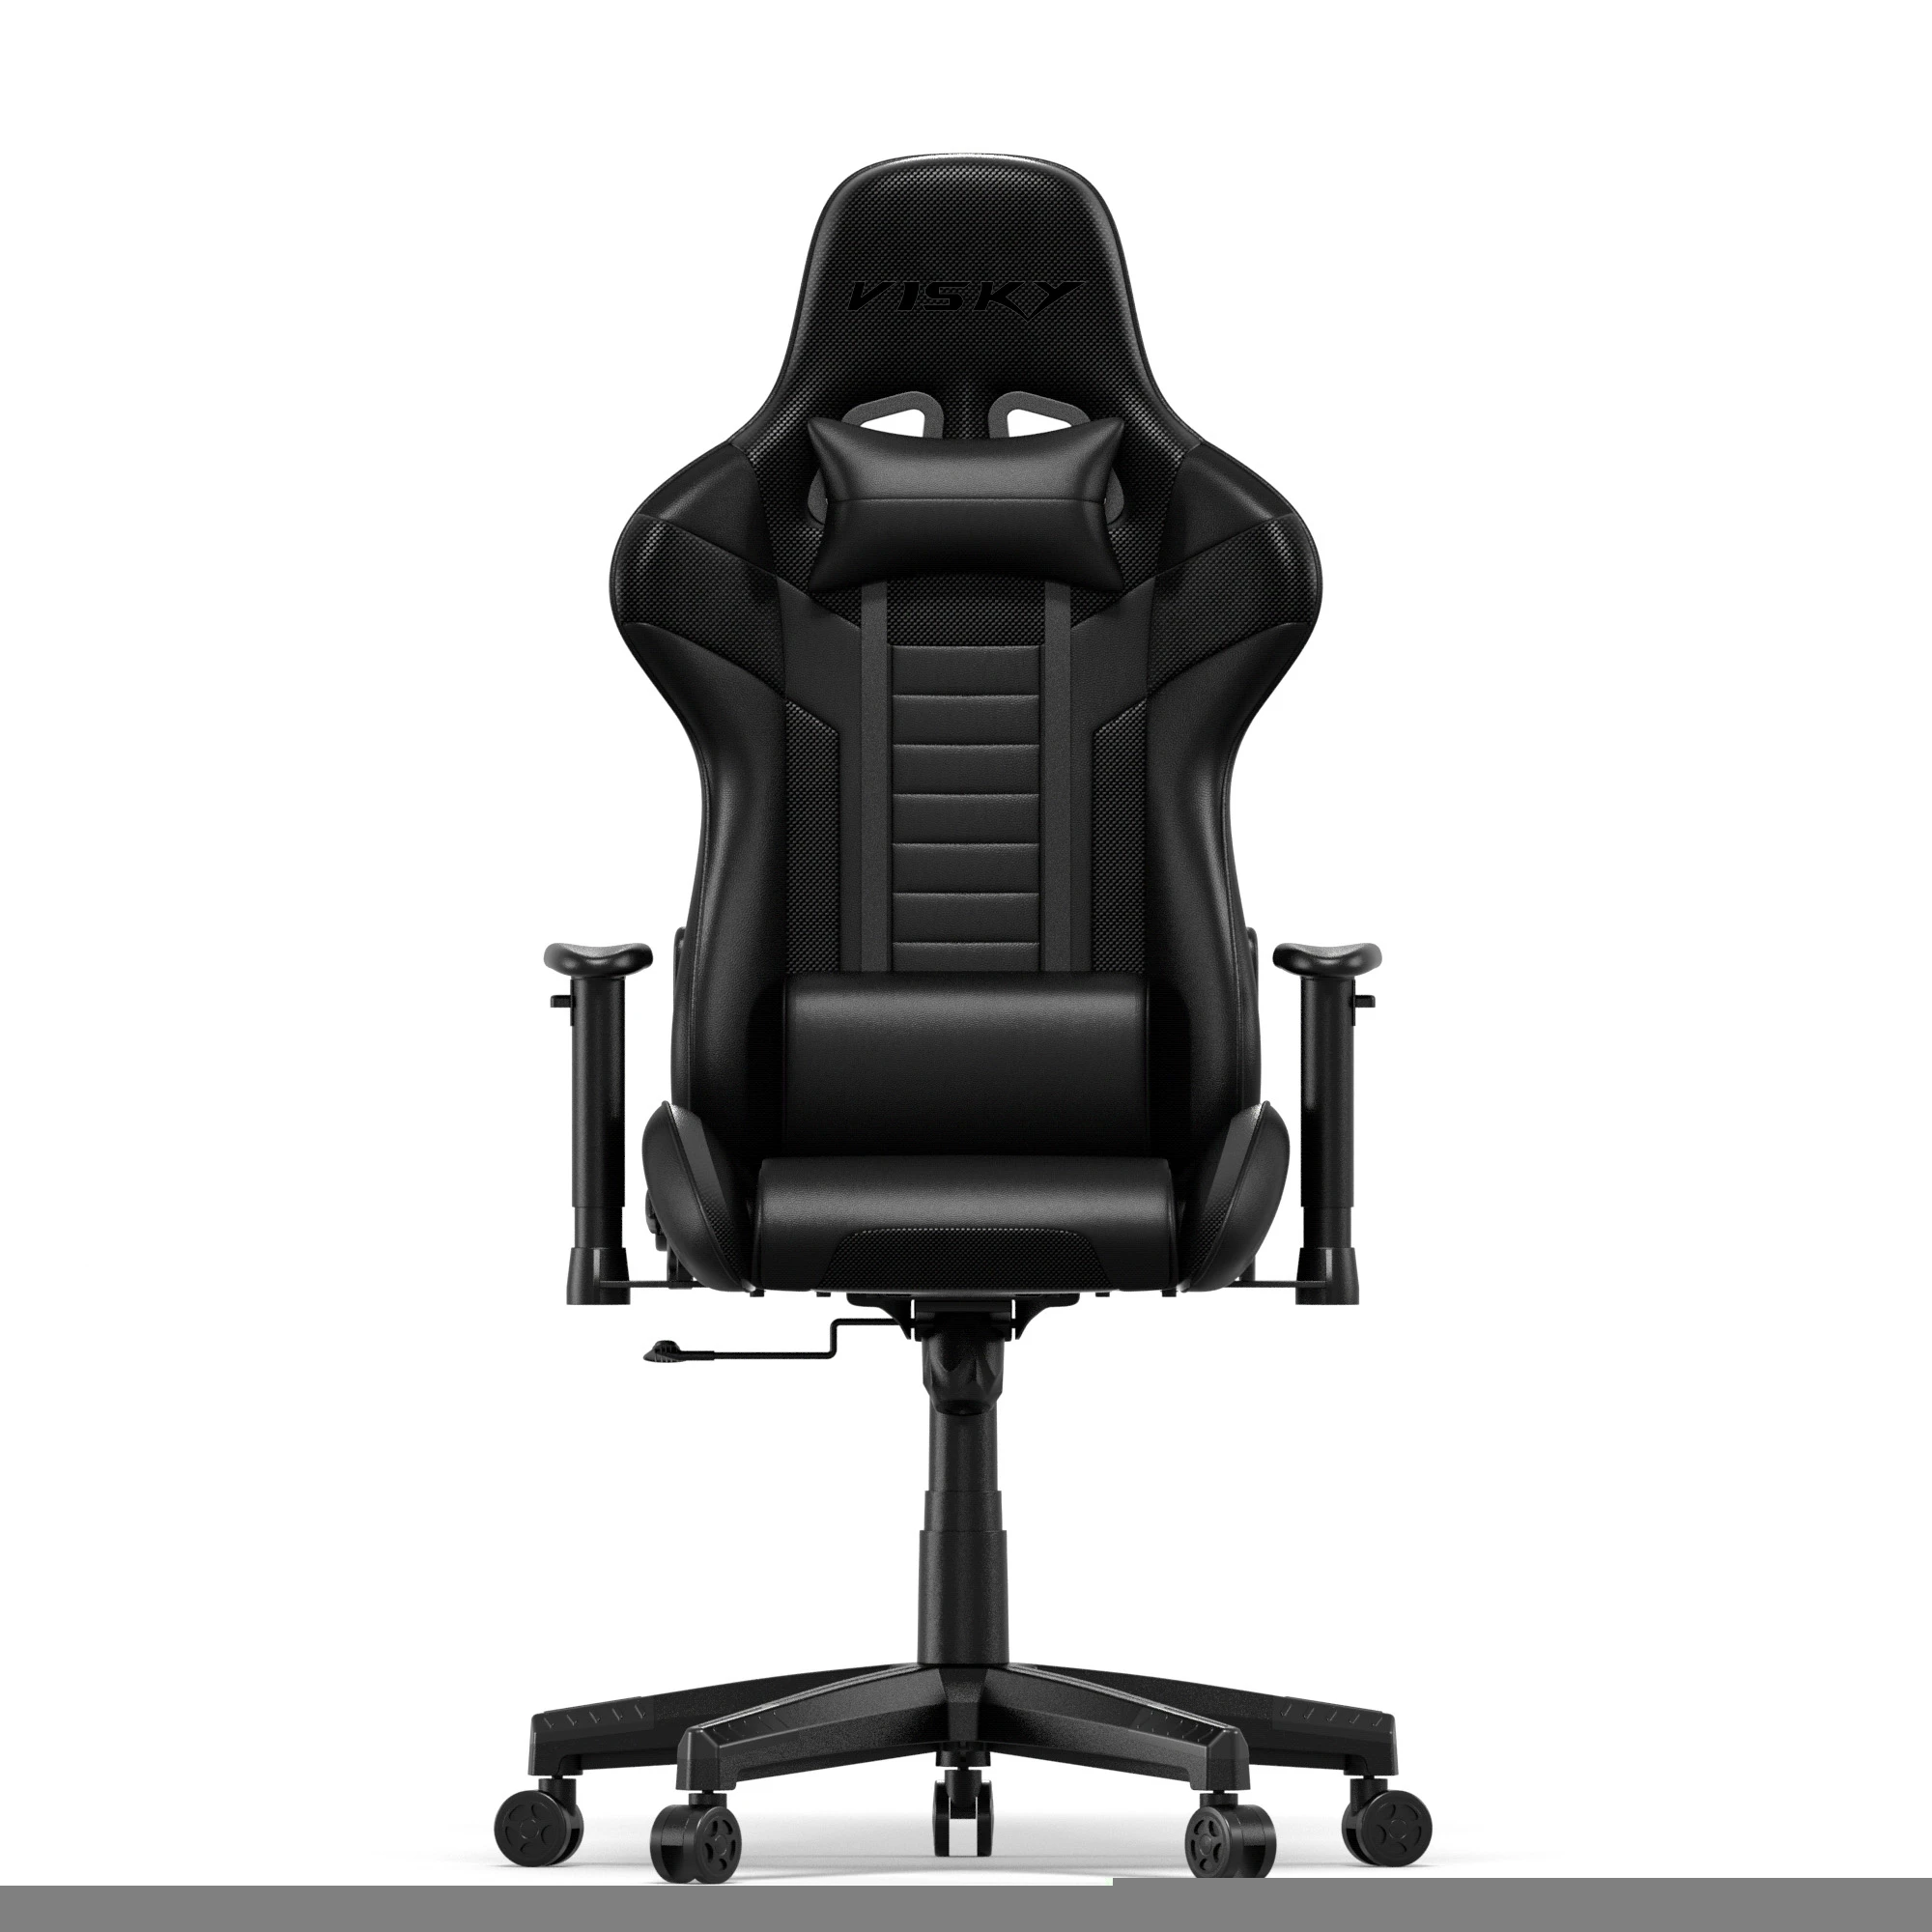 VISKY zero gravity adjustable colorful design office chair red massage pc computer sillas gamer racing gaming chair